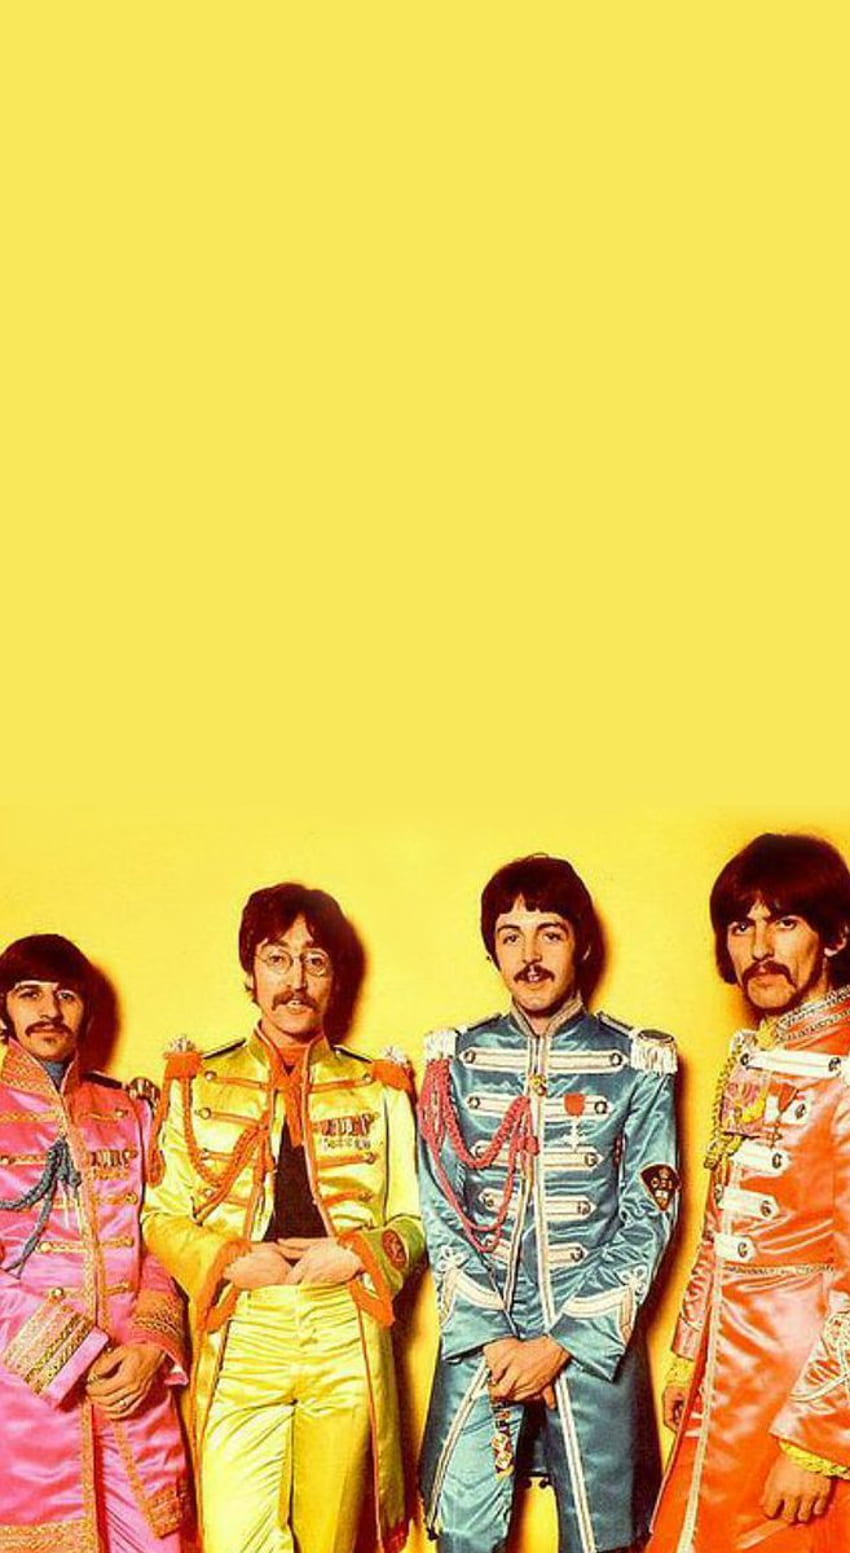 3840x2160px, 4K Free download | Sgt. Pepper's Lonely Hearts Club Band ...